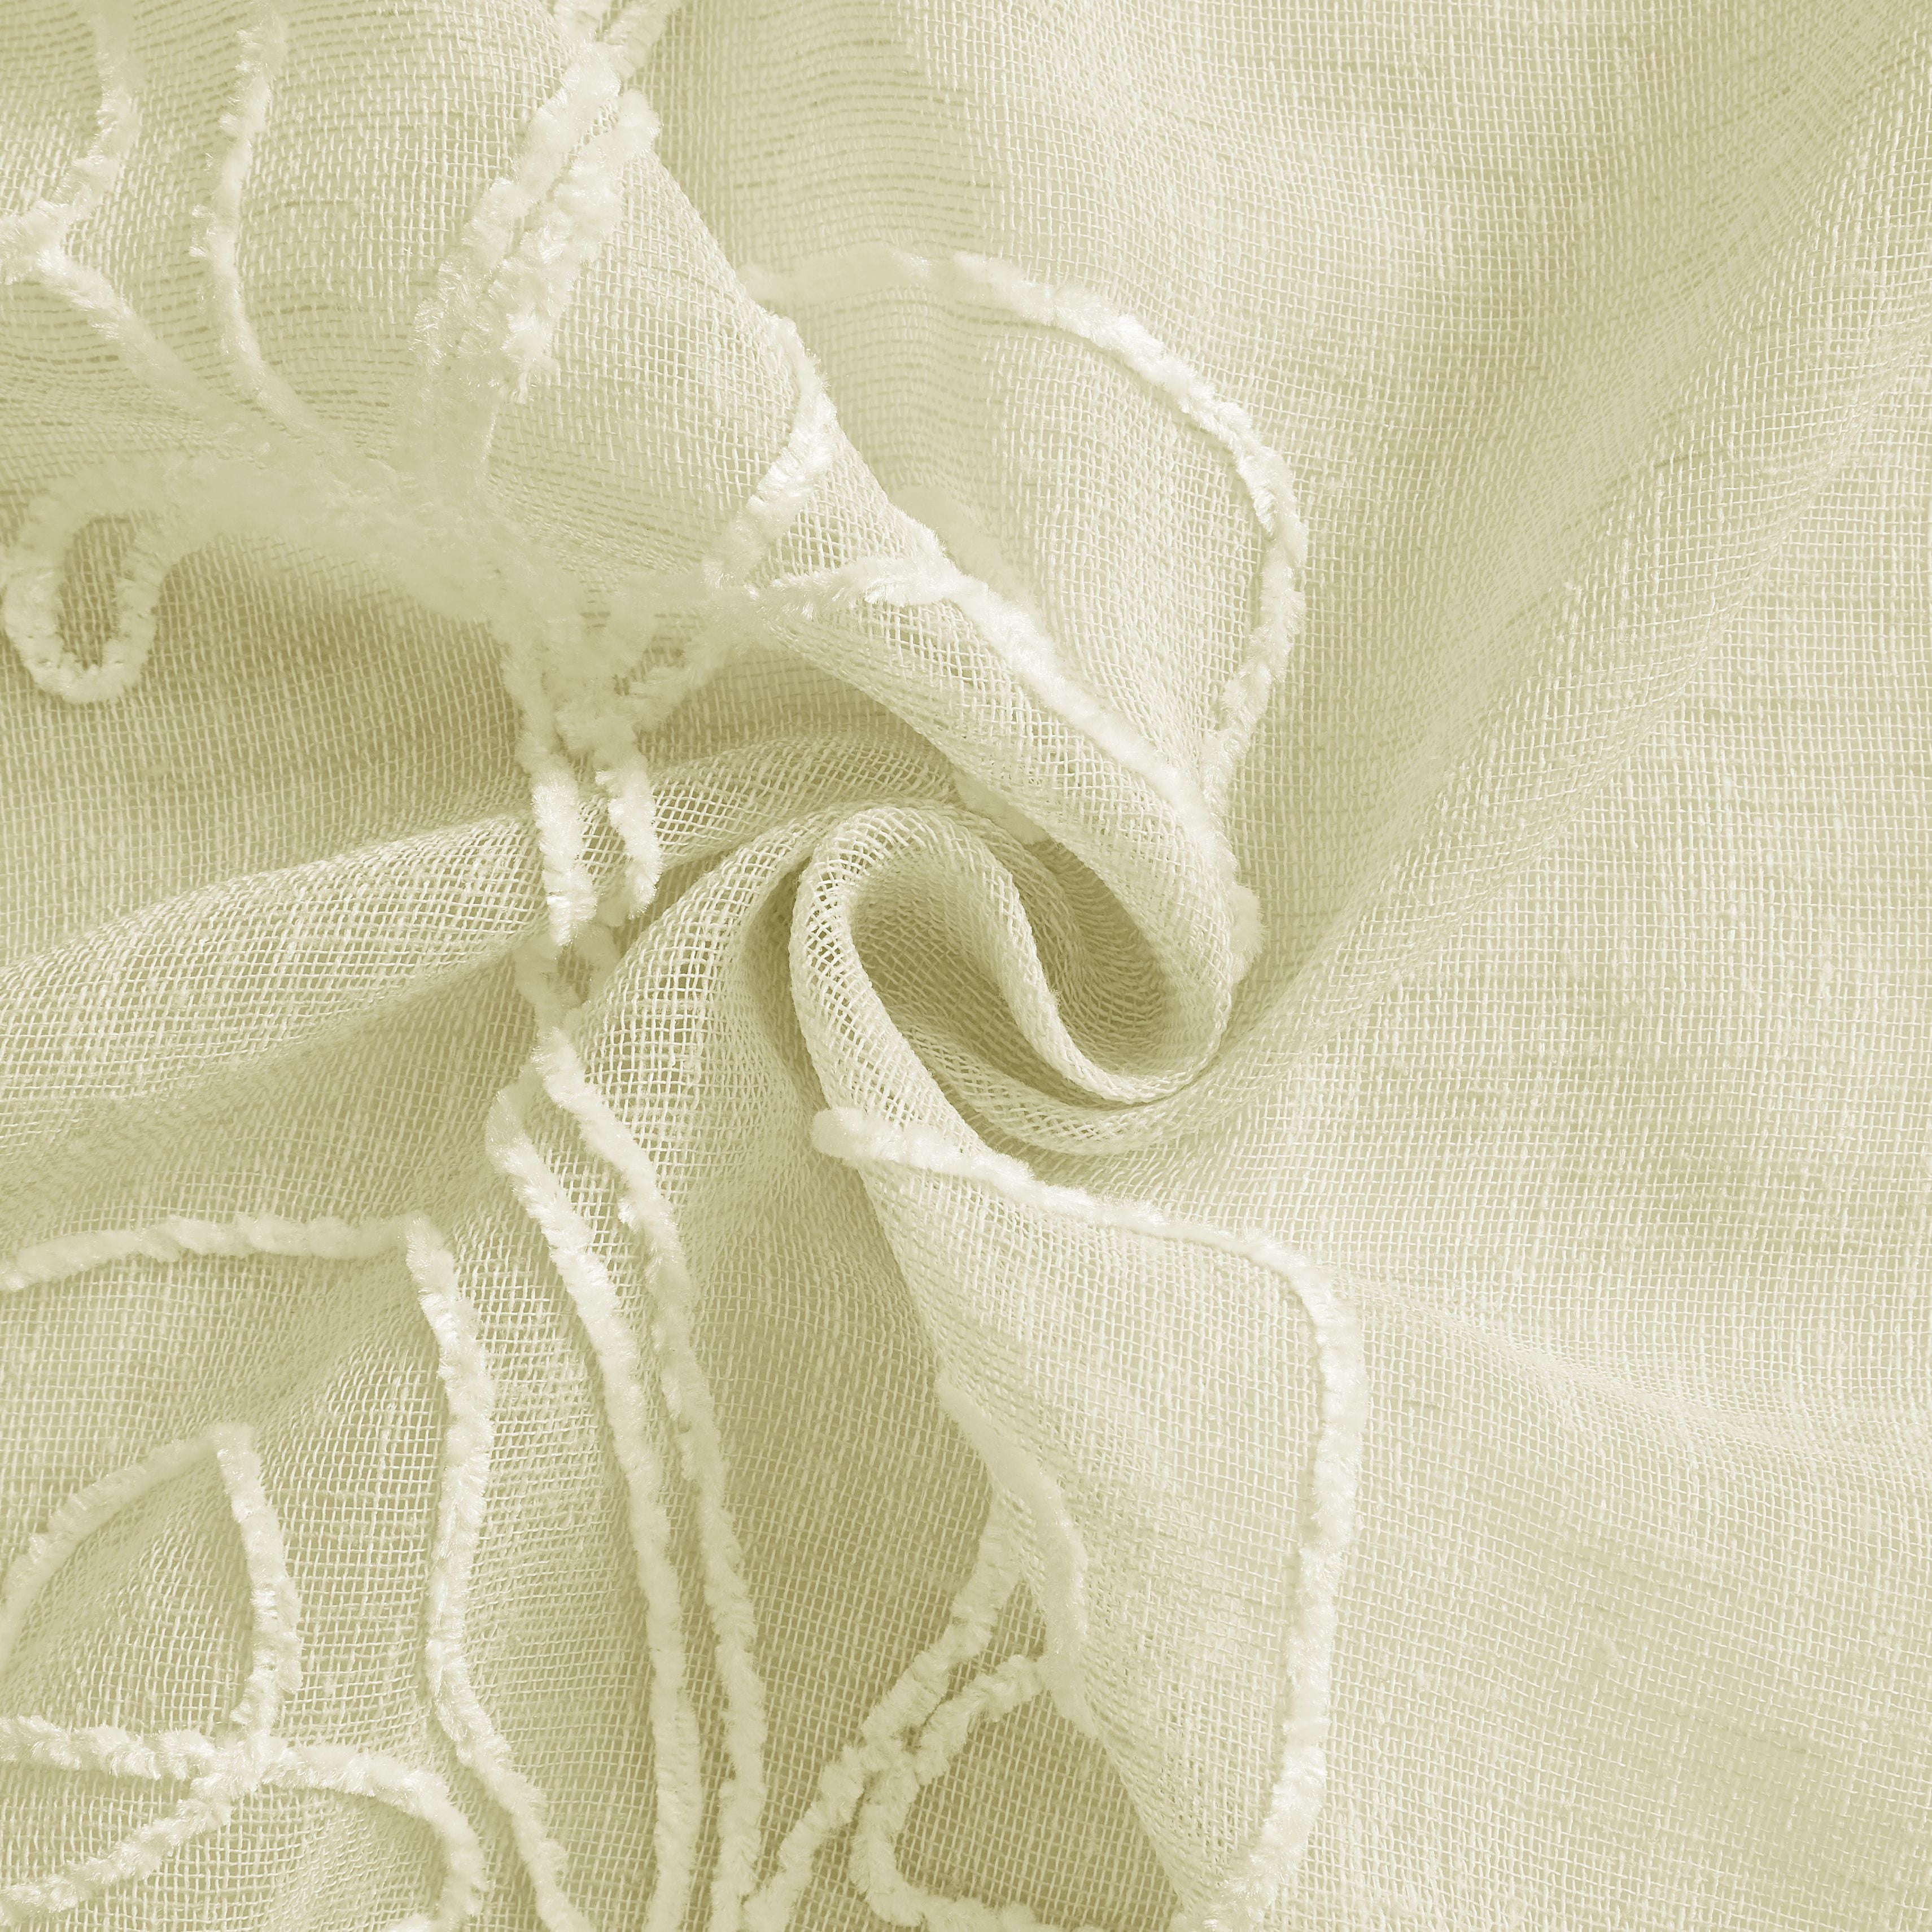 Dainty Home Stella 3D Linen Look Textured Floral 3D Chenille Designed Fabric Shower Curtain